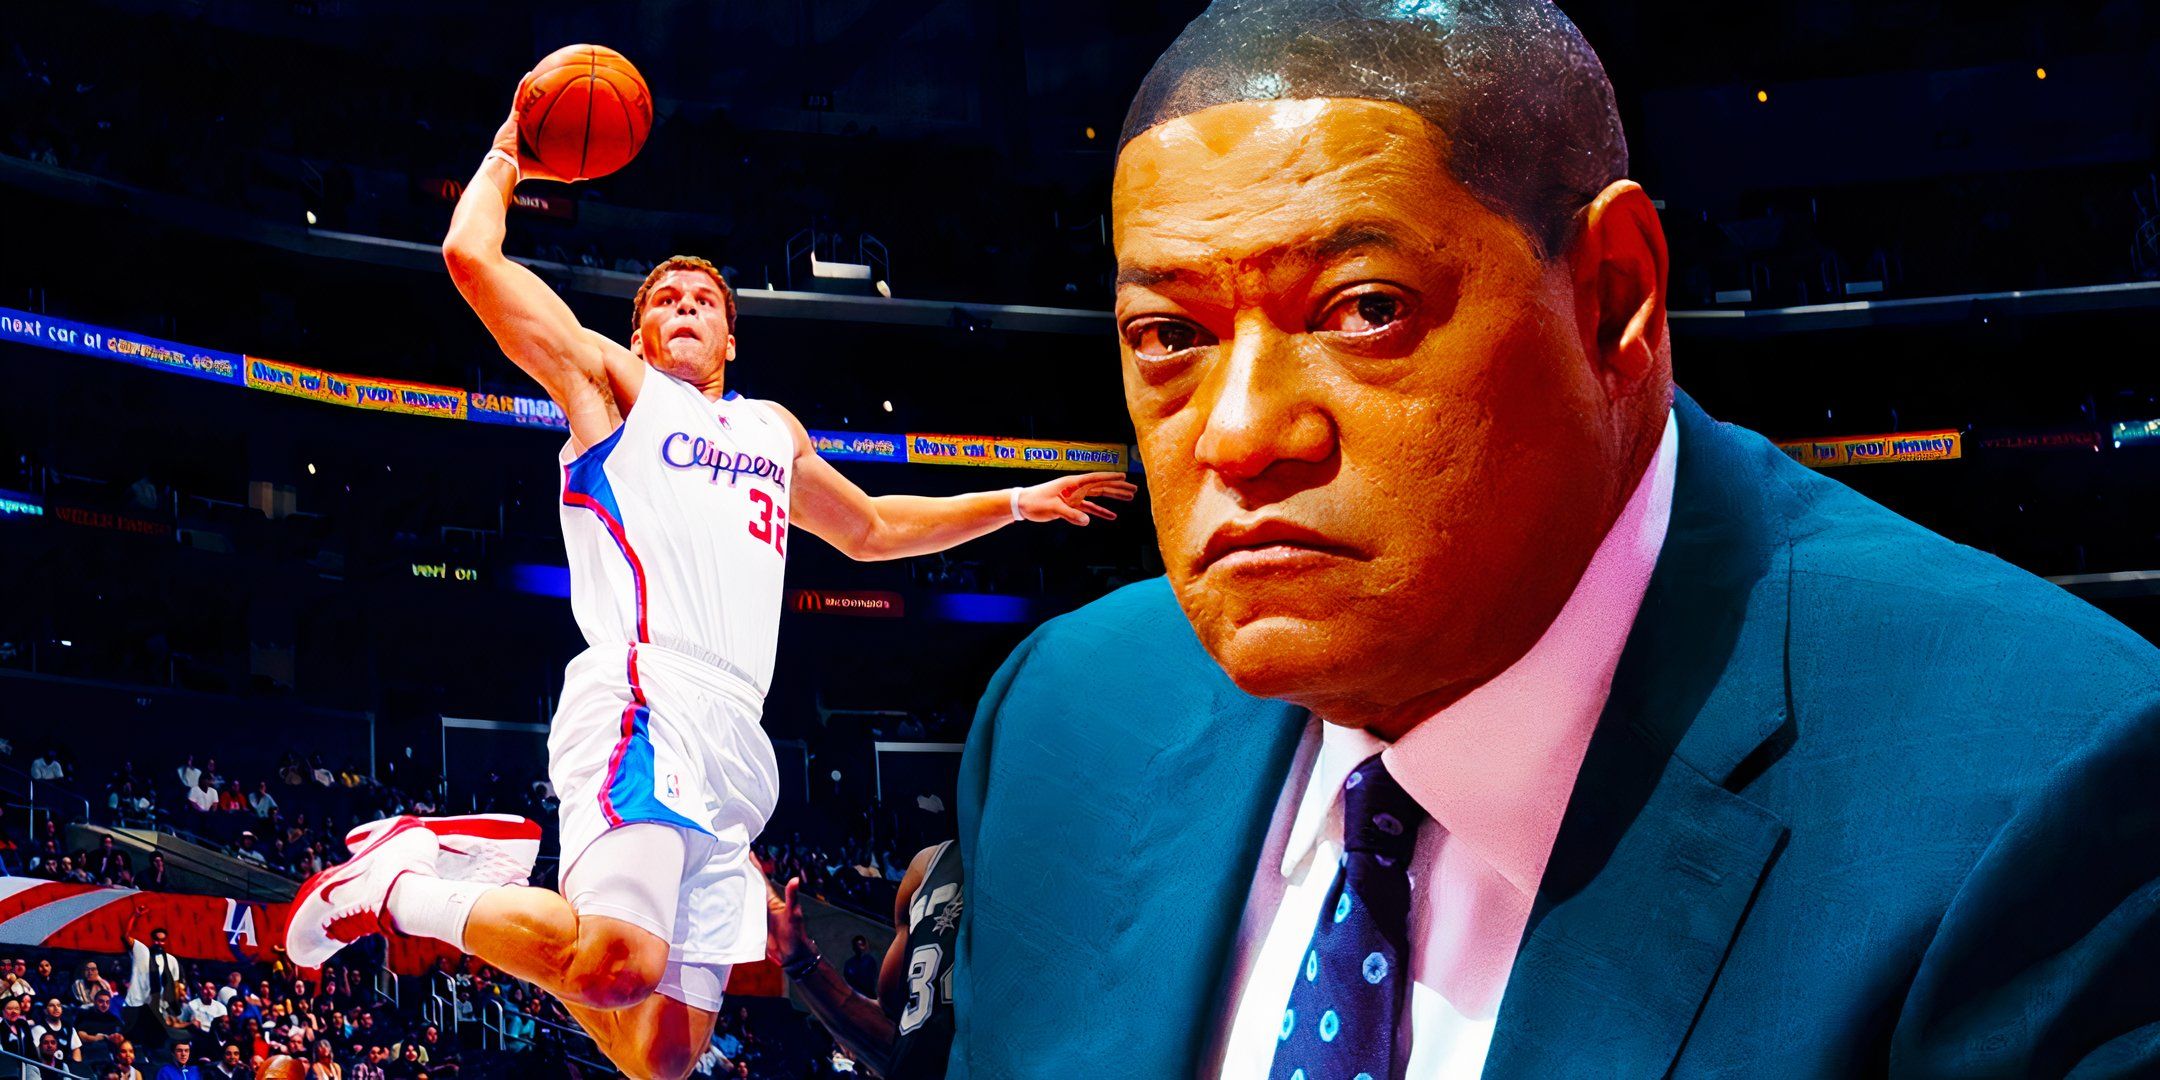 Laurence Fishburne as Doc Rivers with Blake Griffin